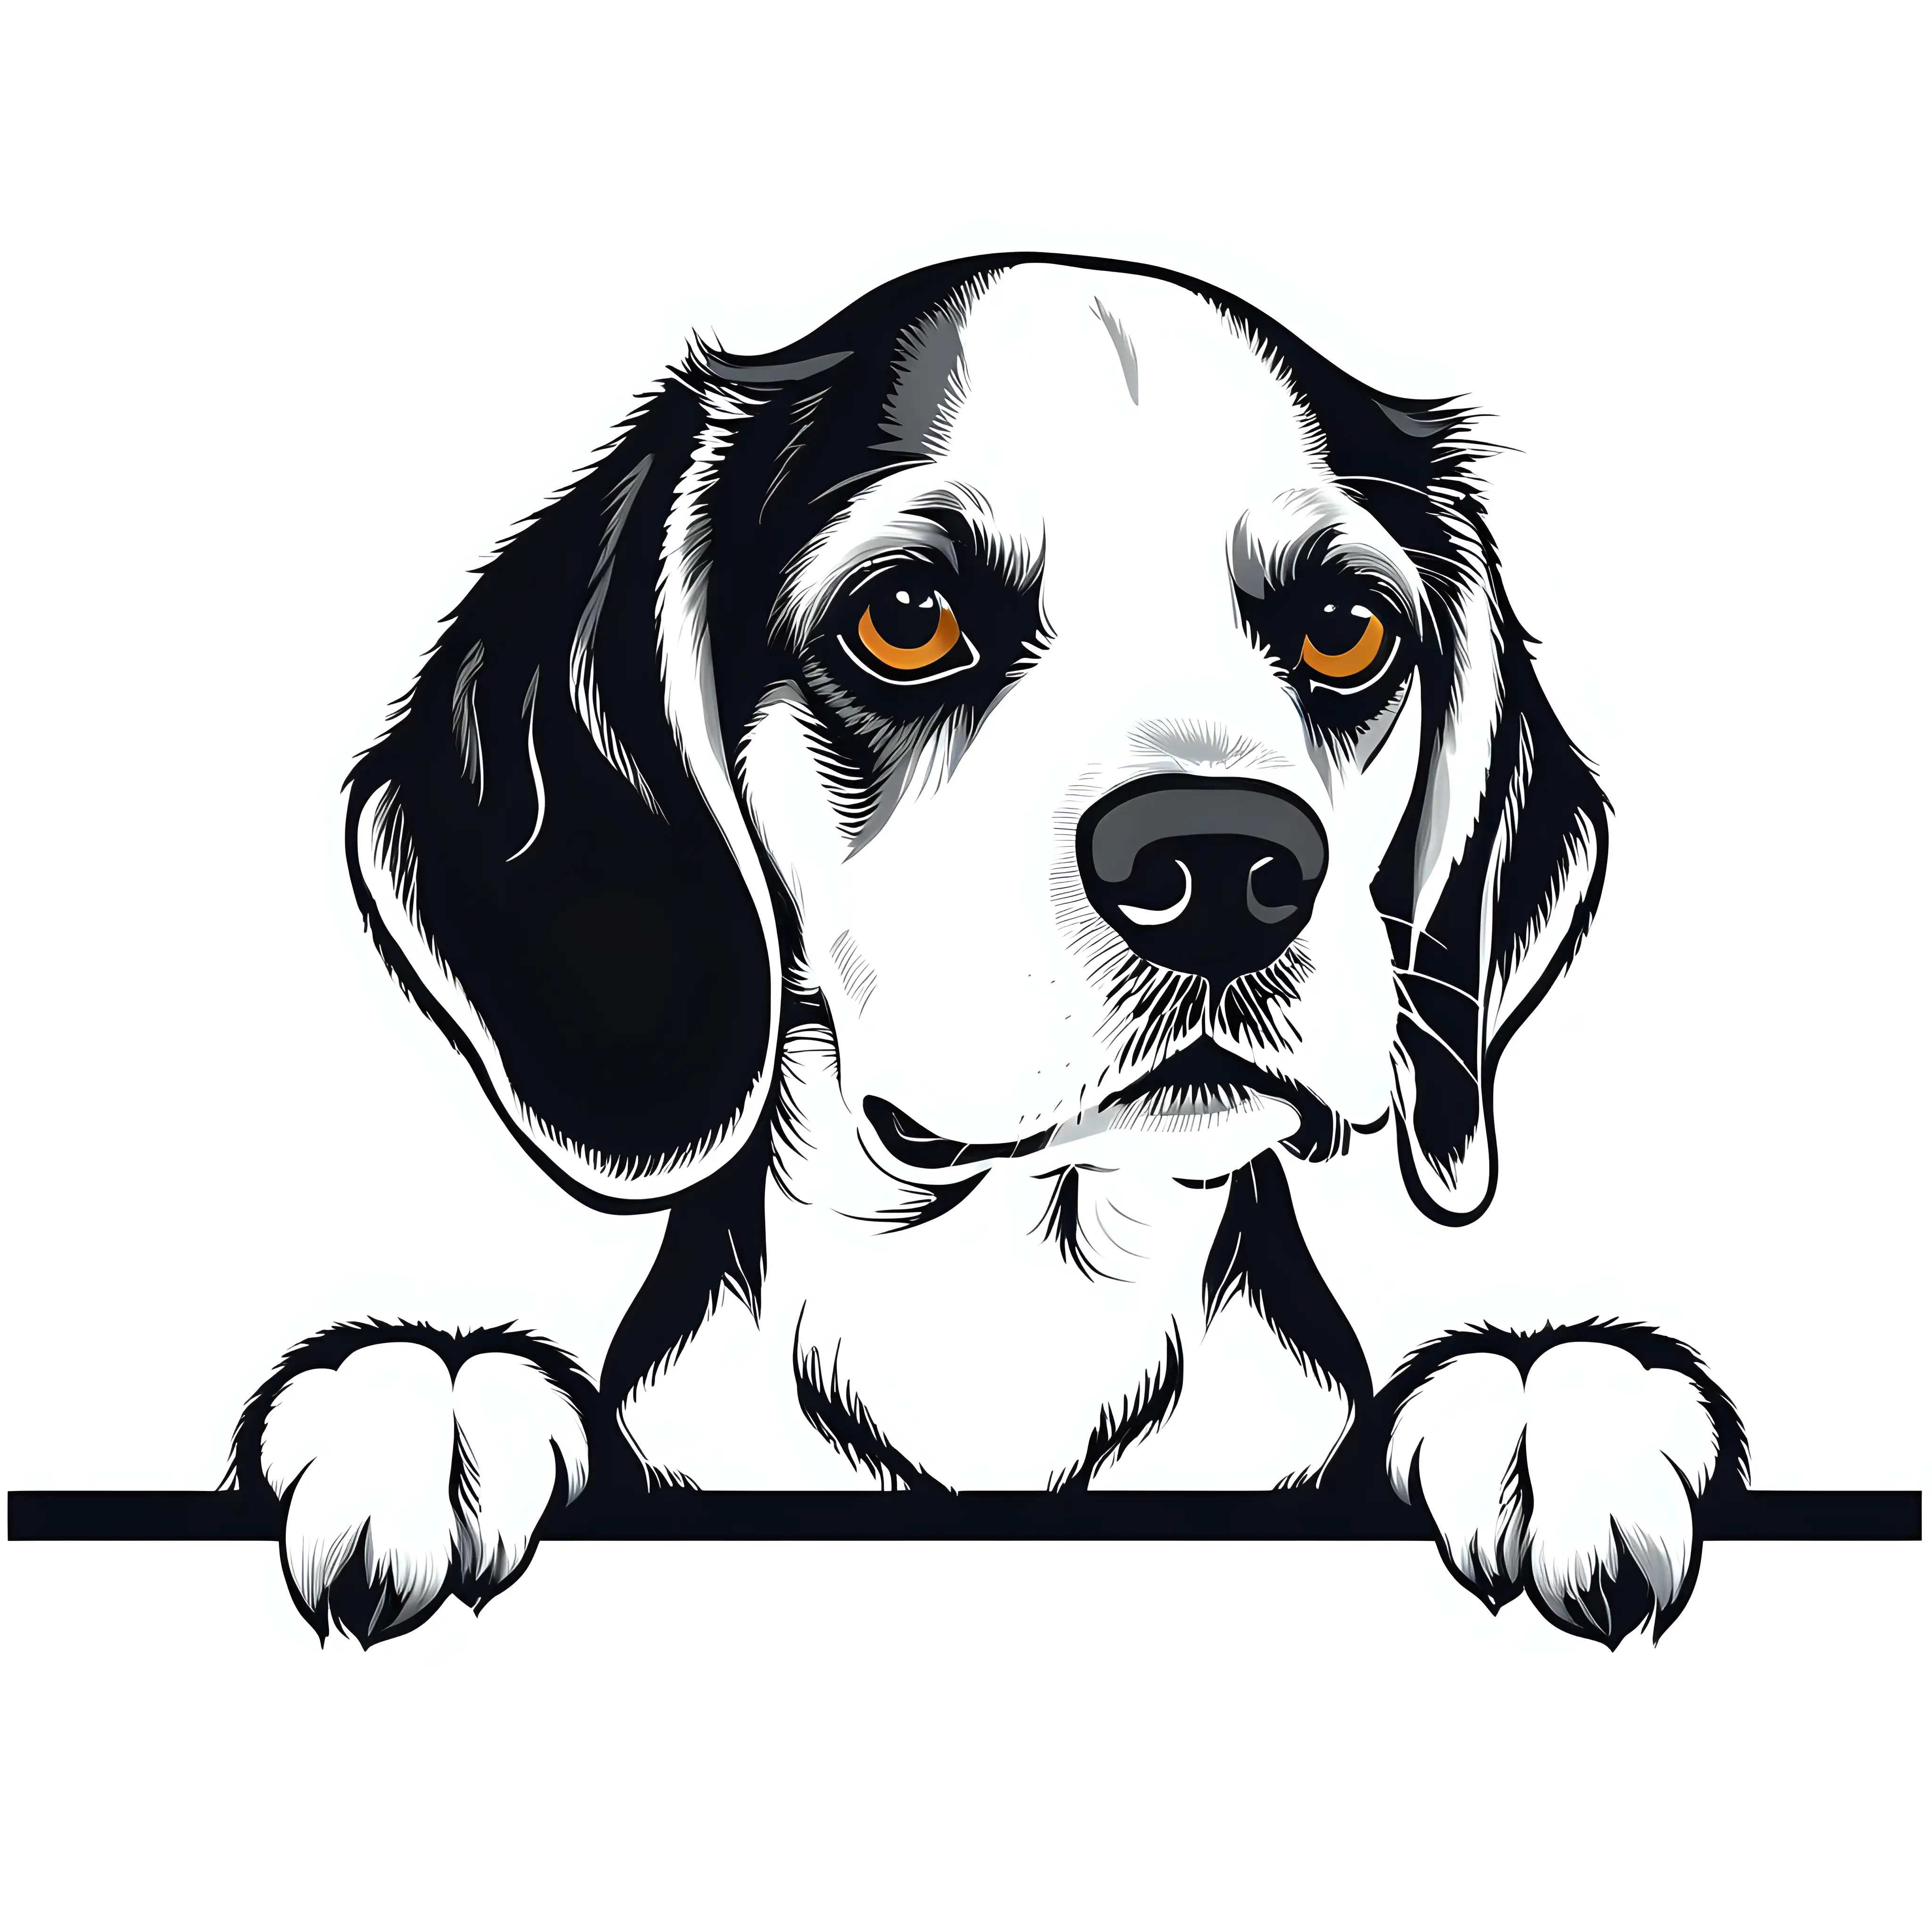 Adorable Beagle Vector Art on White Background